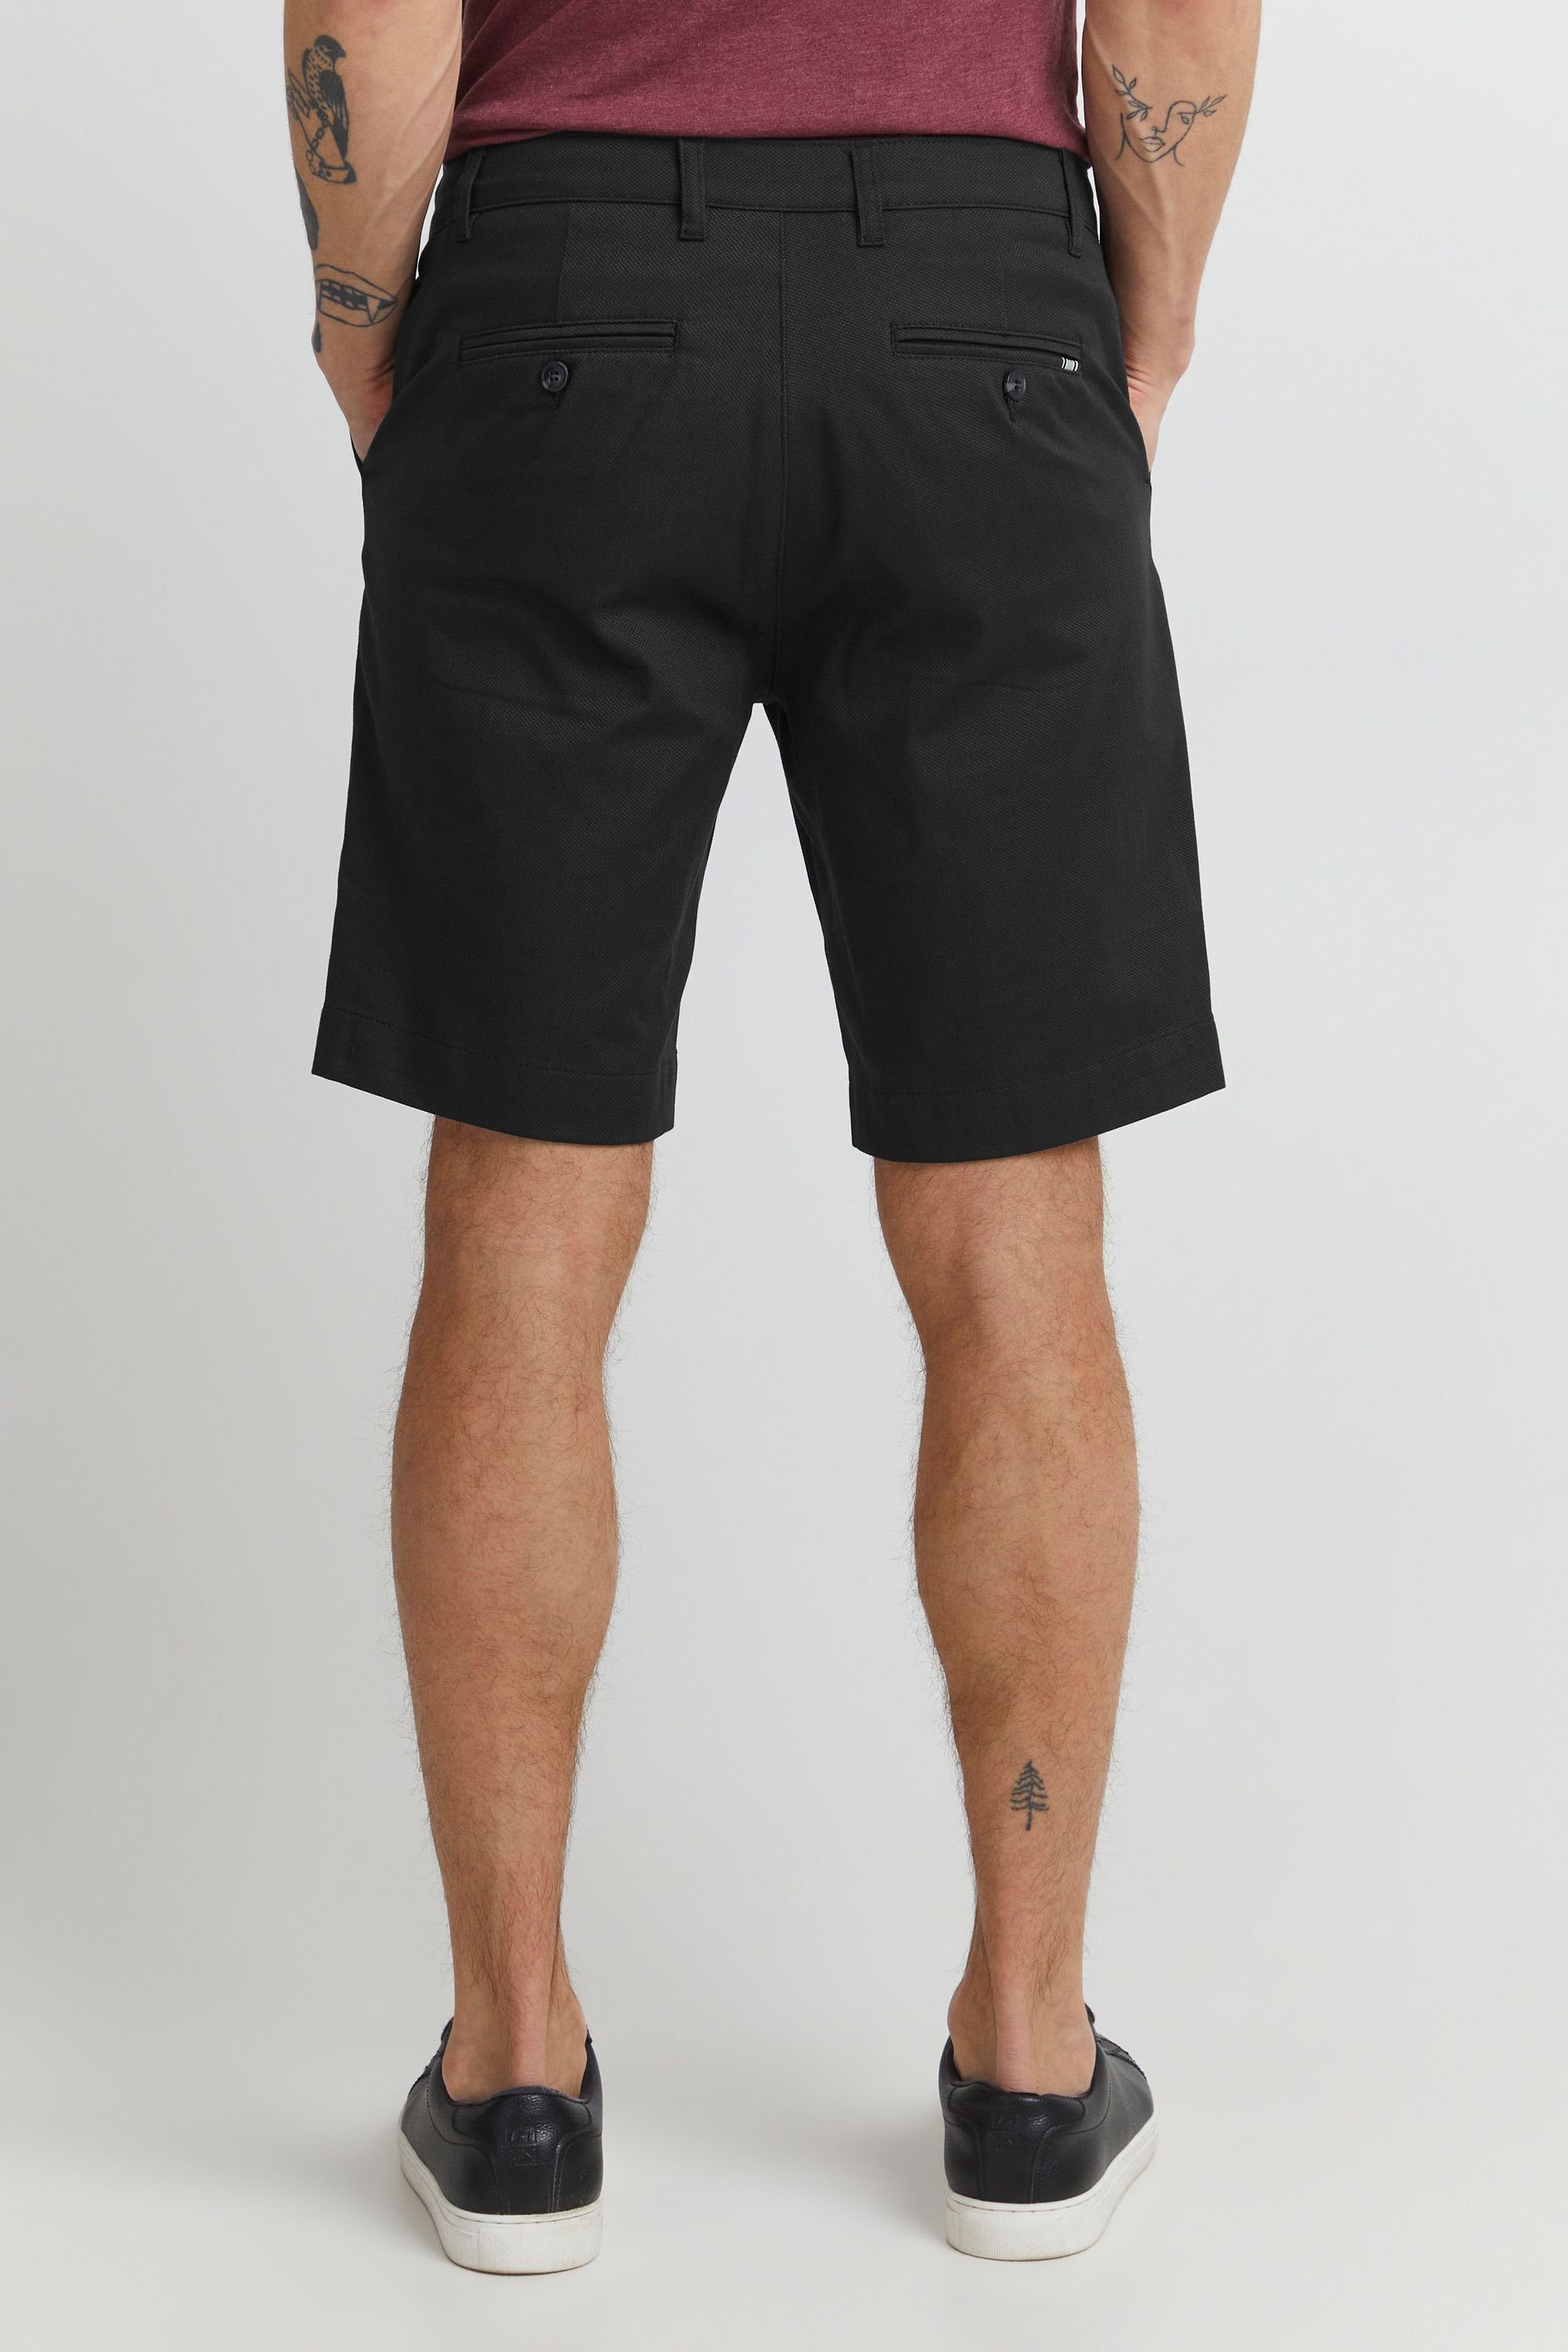 Shorts Black Structure 21107204 !Solid SHO SDFred True - (194008)